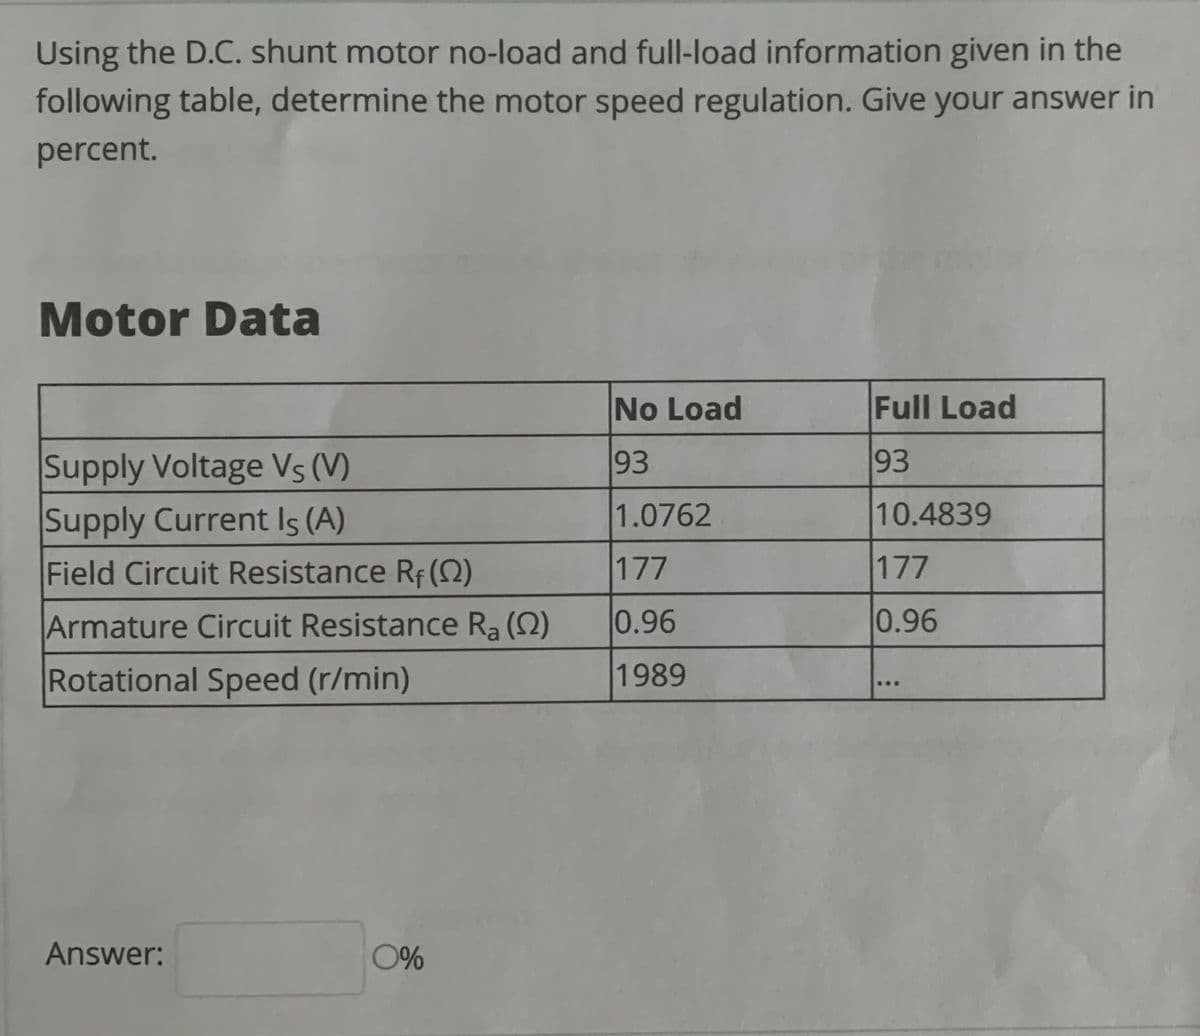 Using the D.C. shunt motor no-load and full-load information given in the
following table, determine the motor speed regulation. Give your answer in
percent.
Motor Data
No Load
Full Load
93
93
Supply Voltage Vs (V)
Supply Current Is (A)
1.0762
10.4839
Field Circuit Resistance Rf (S)
177
177
Armature Circuit Resistance Ra (2)
0.96
0.96
Rotational Speed (r/min)
1989
...
Answer:
0%
